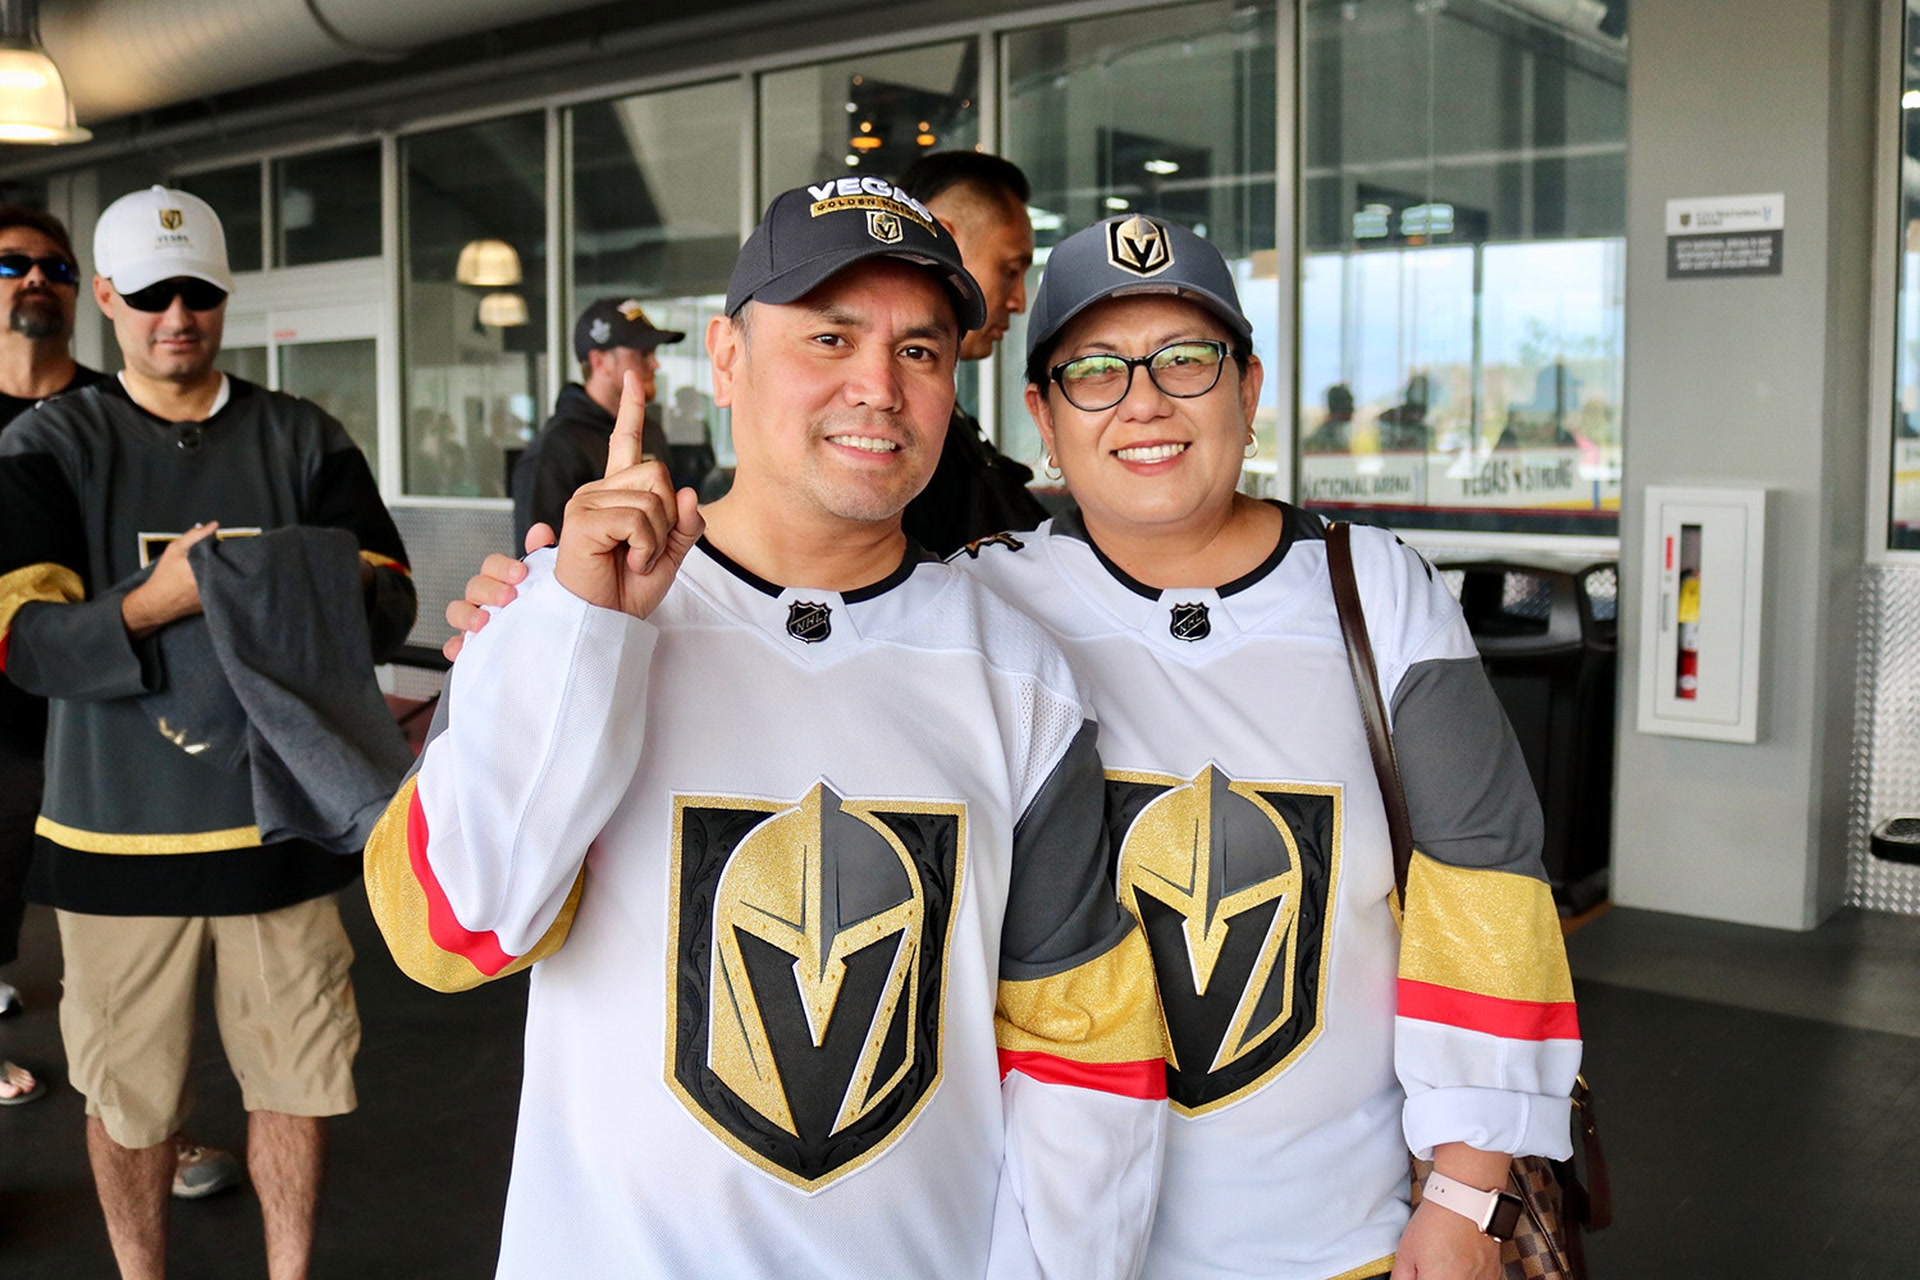 Golden Knights break records for Cup merchandise sales, National Sports